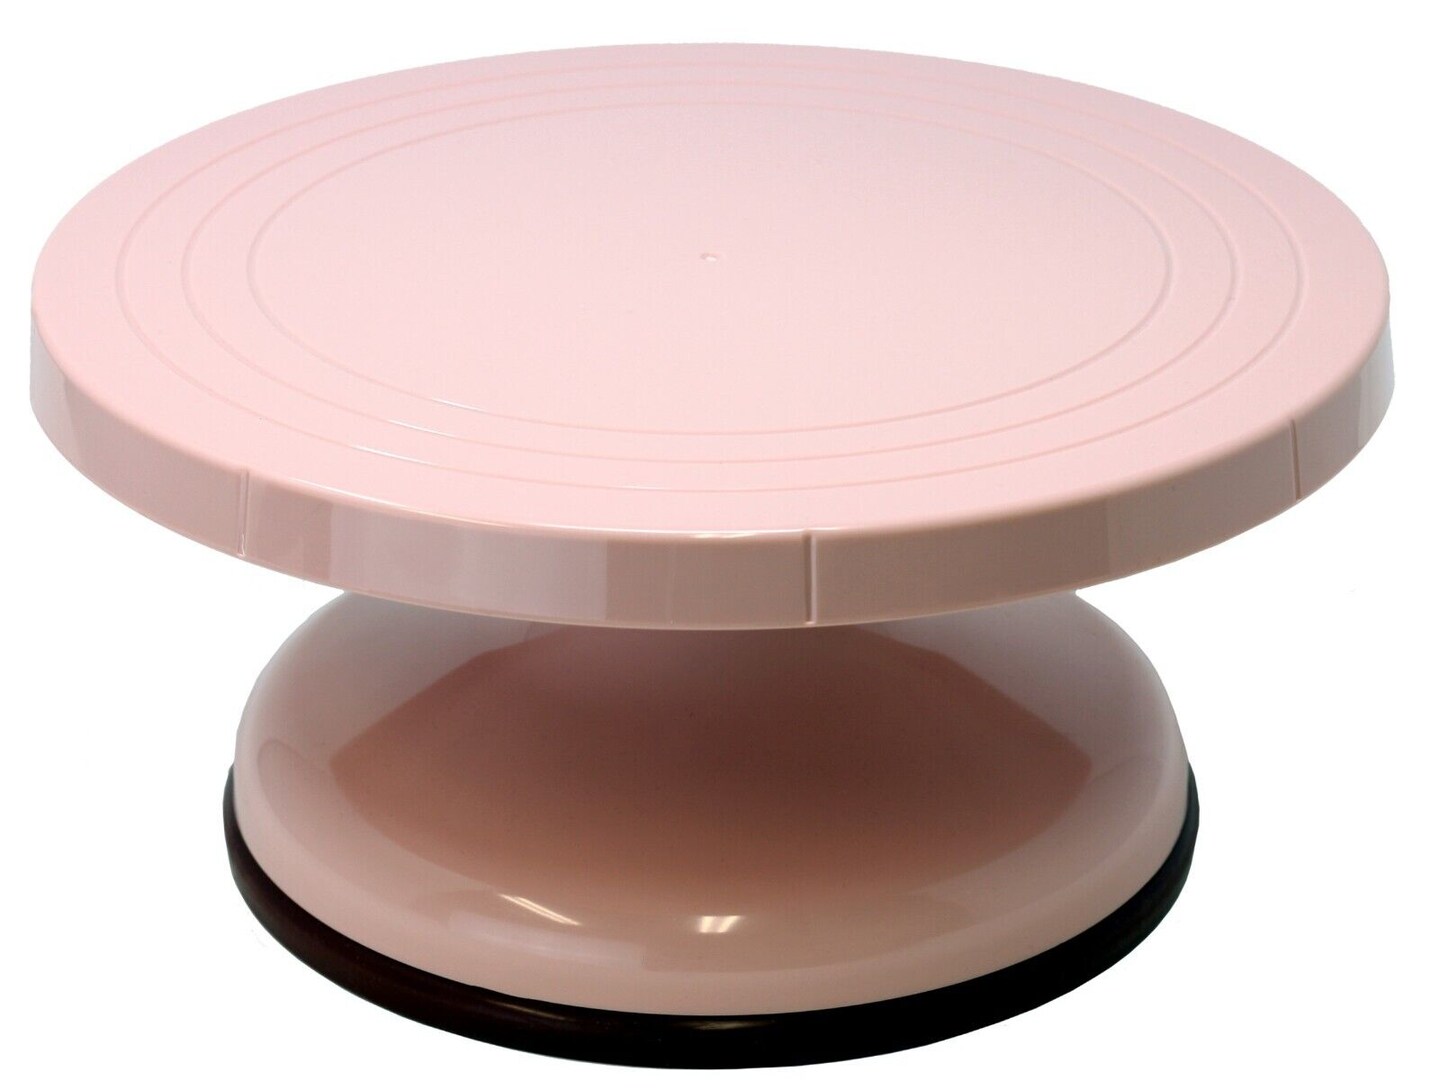 Plastic Piping Table | Rotating Cake Stand | Plastic Cake Stand | Plastic  Cake Pan - Cake Tools - Aliexpress